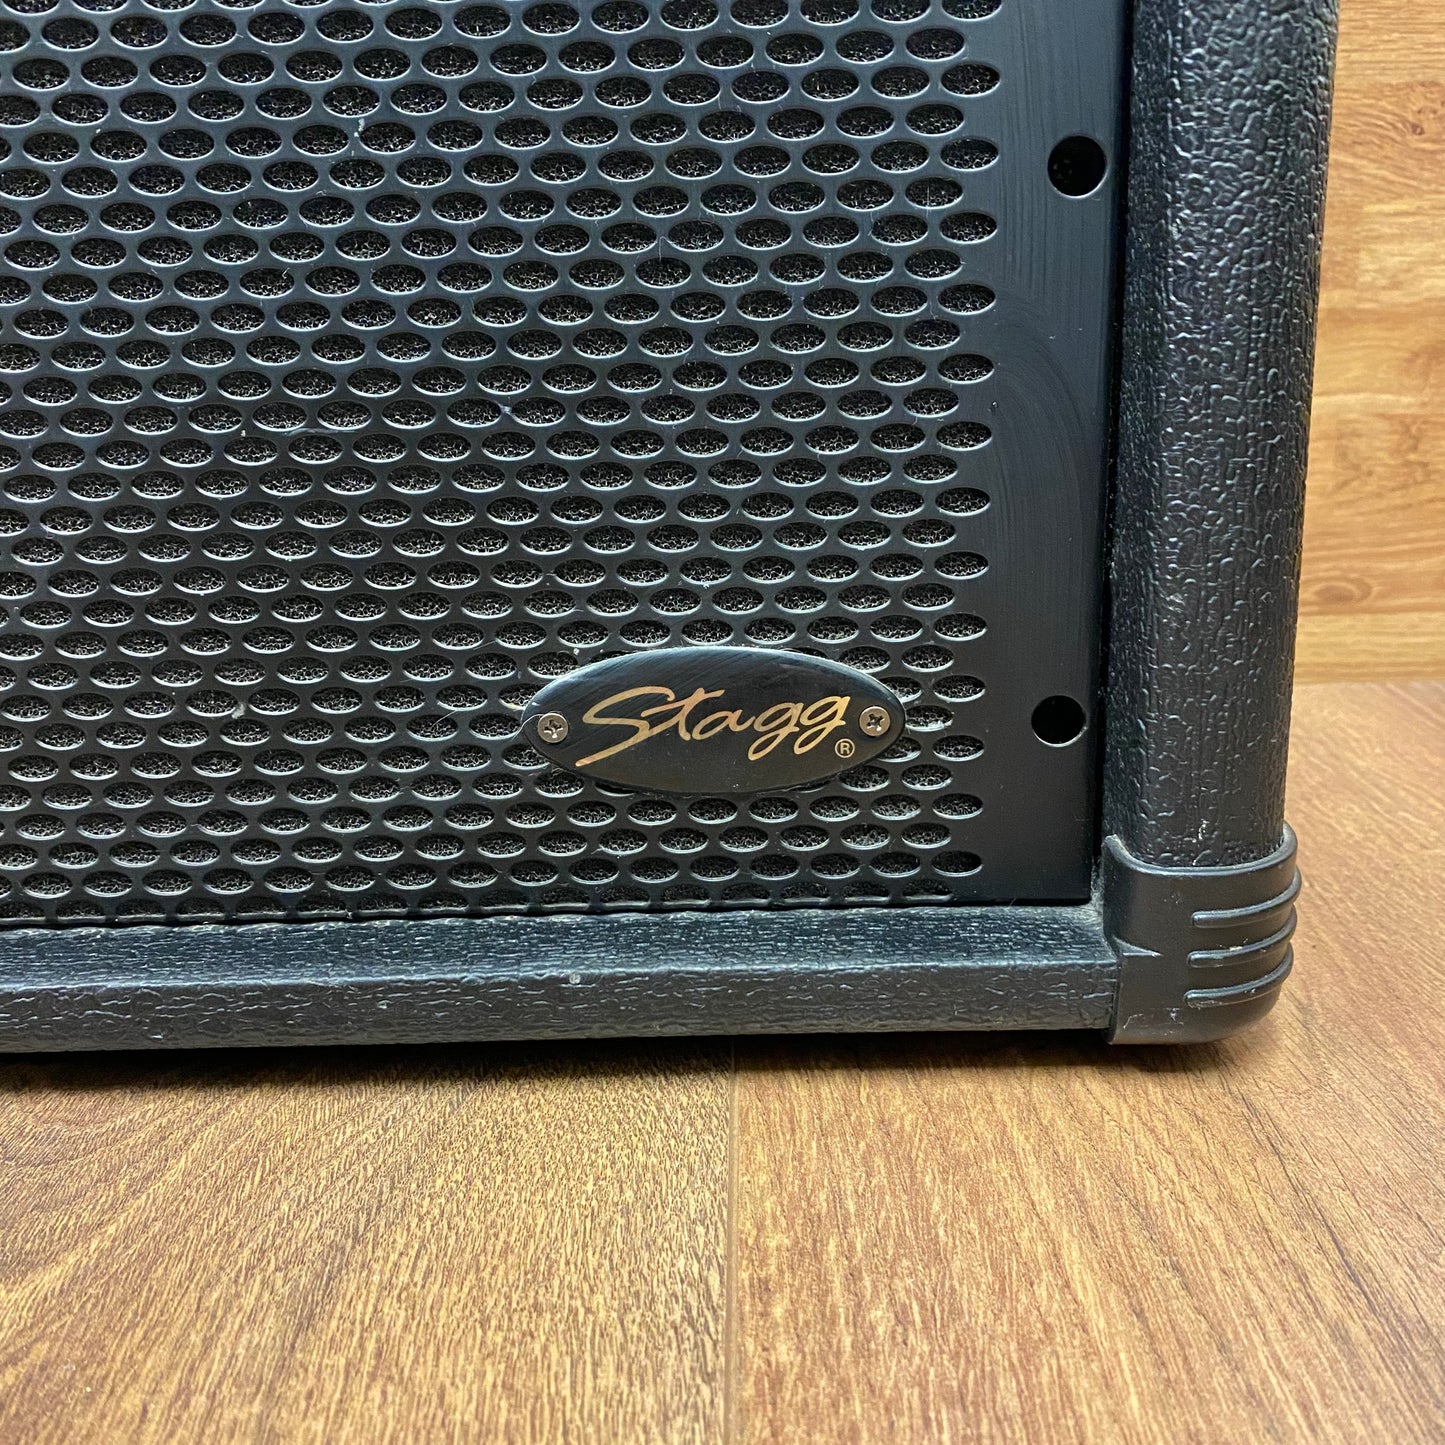 Pre-Owned Stagg 20 GA R 20w Guitar Amplifier